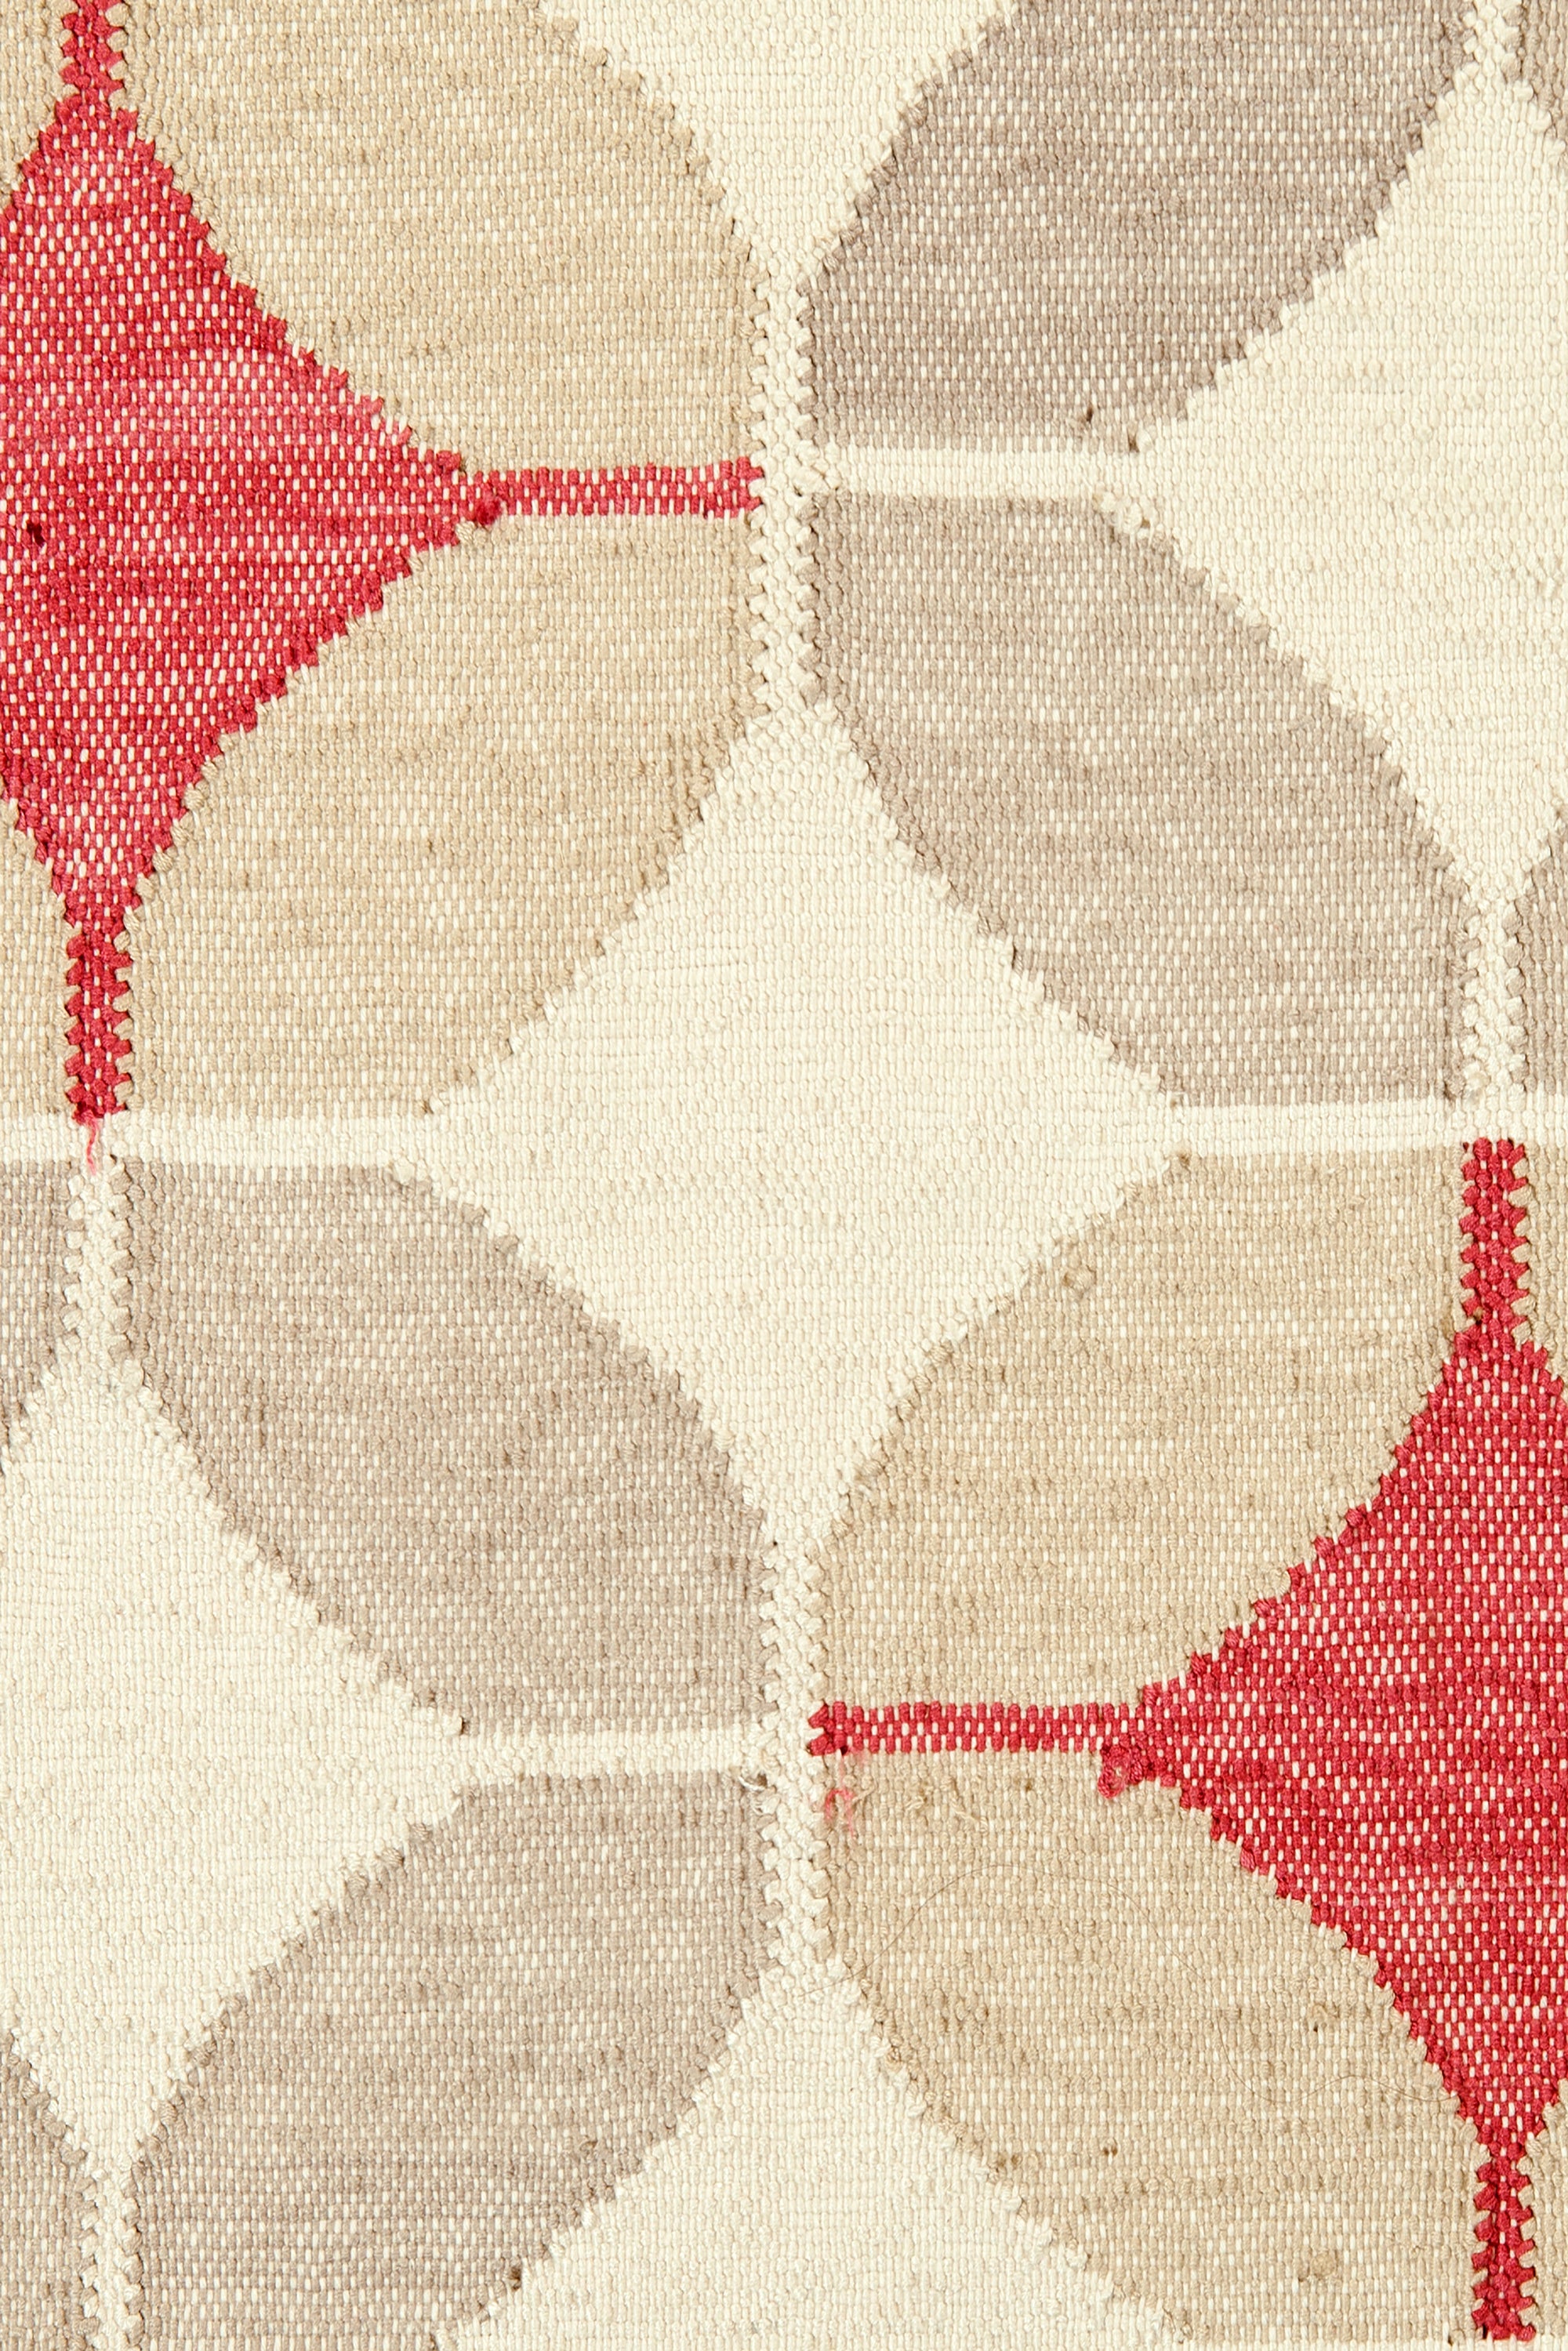 Detail of Alhambra Rug in Tomato featuring pattern of linked circles that create a star like lattice in a range of tan, beige, ecru and bright red on a soft white field. 